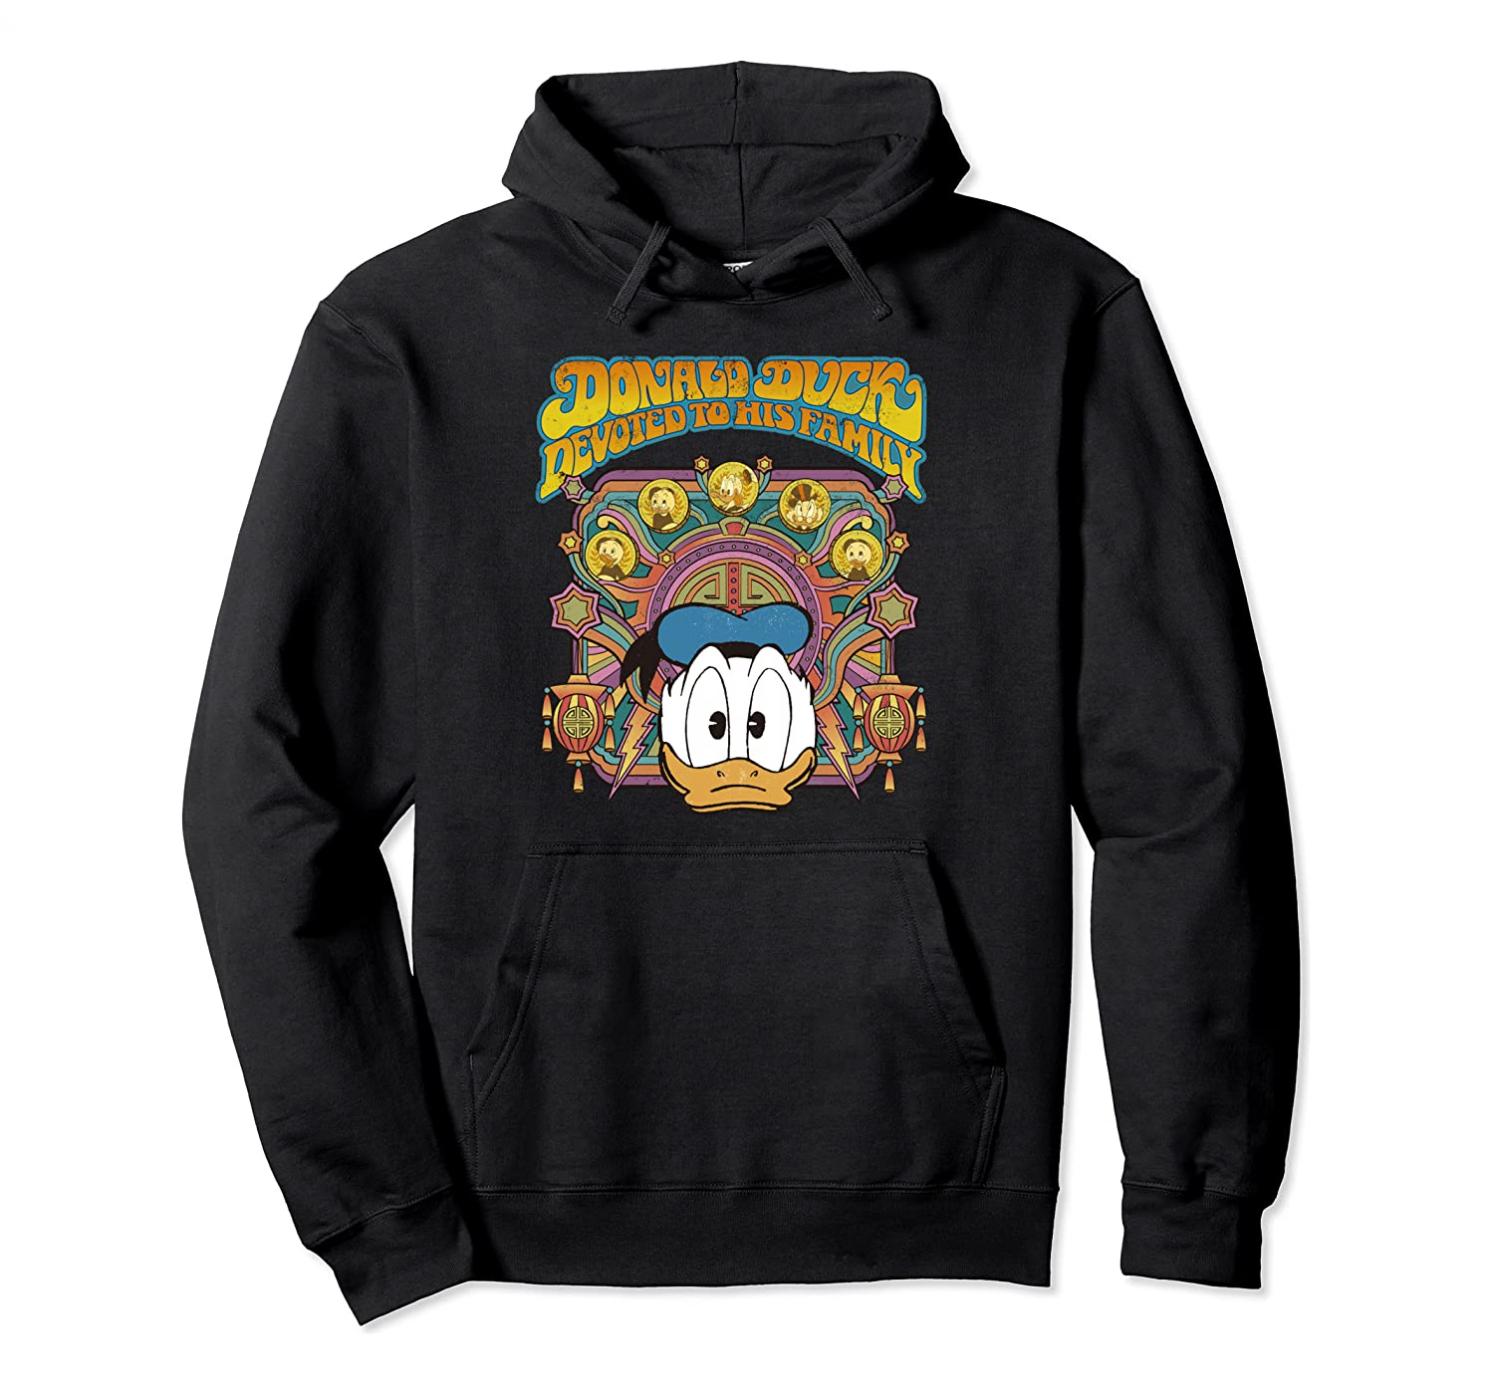 Disney DuckTales Donald Duck Devoted to His Family Retro Pullover Hoodie